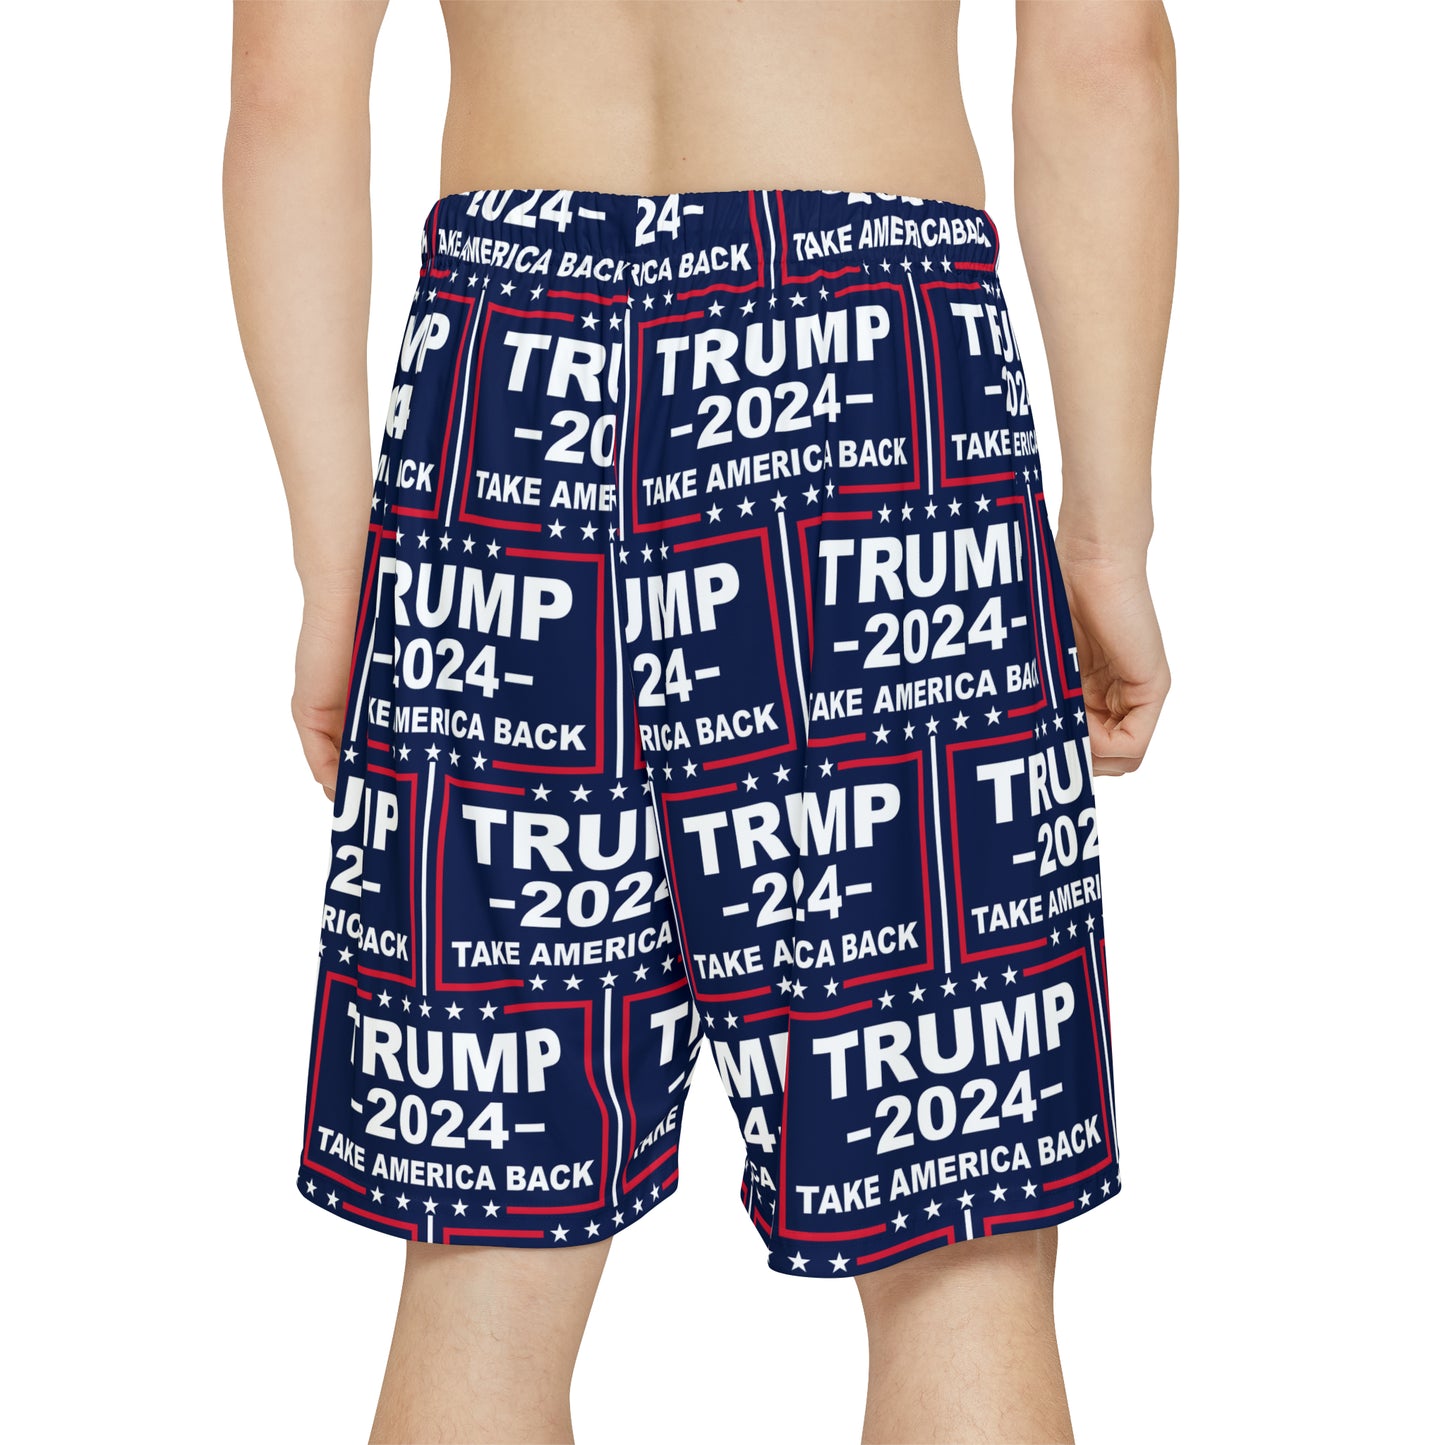 Trump 2024 Take America Back Blue All over Print Men’s Sports Athletic Shorts